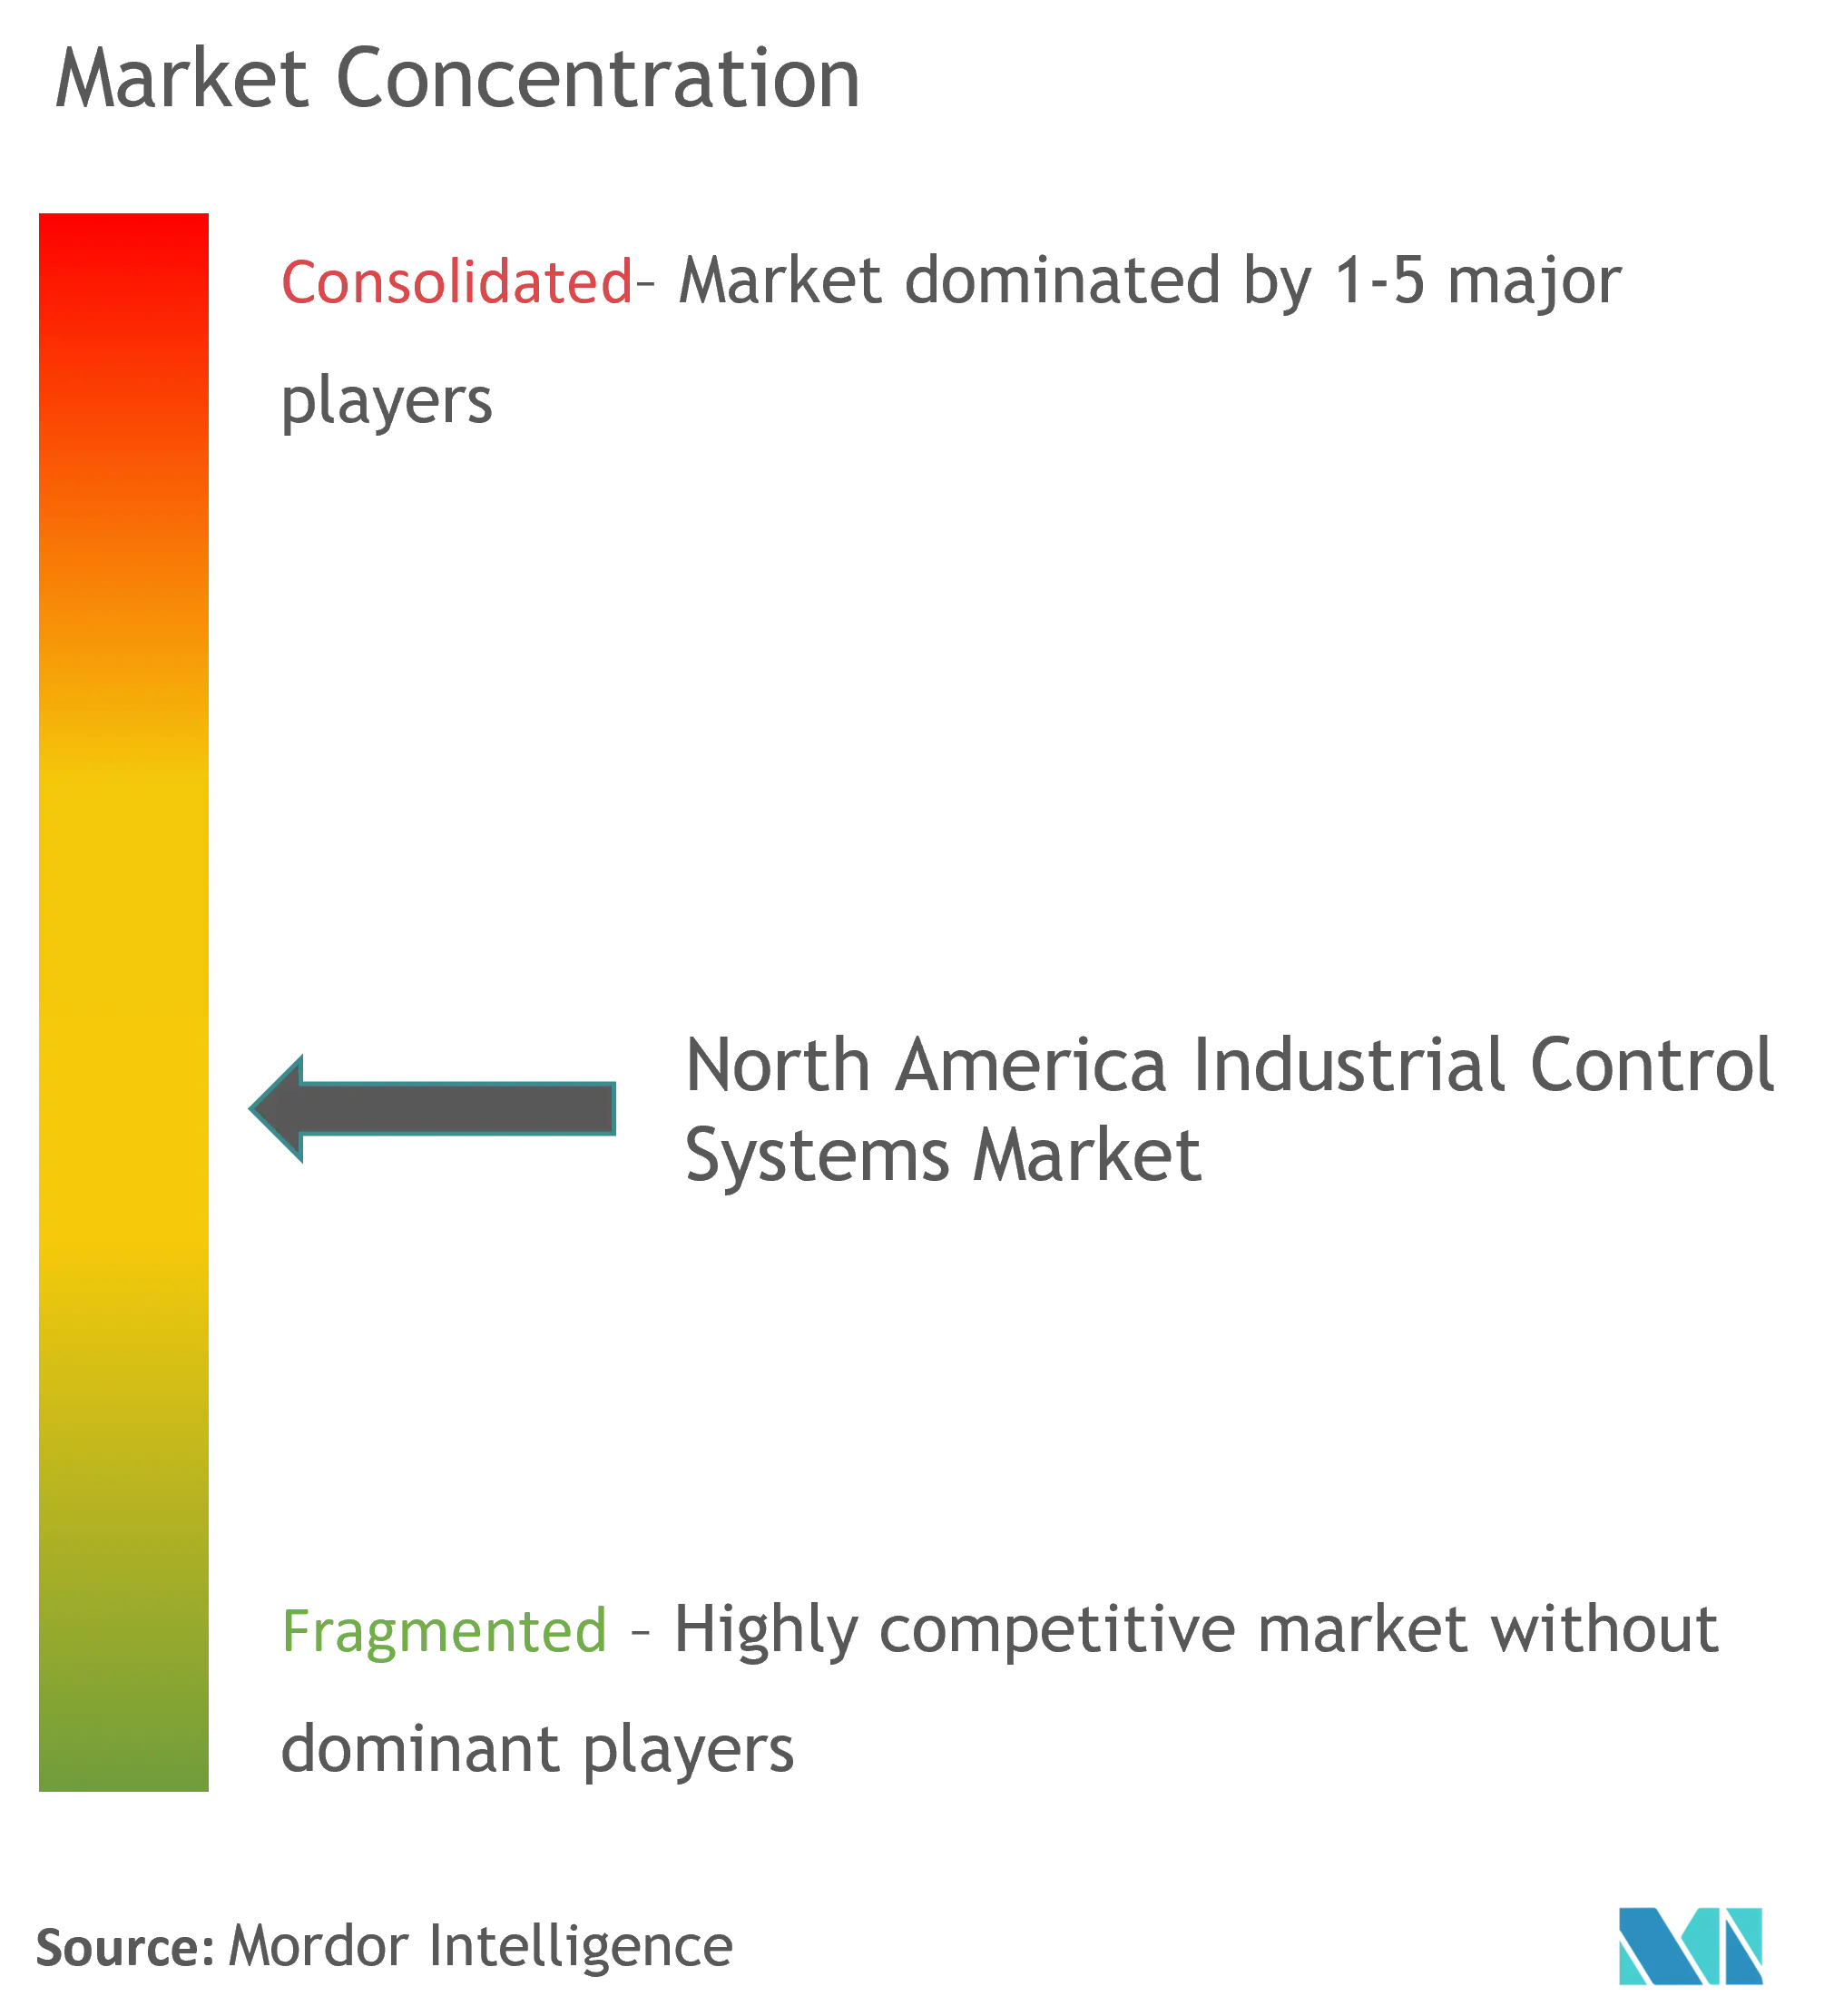 North America Industrial Control Systems Market